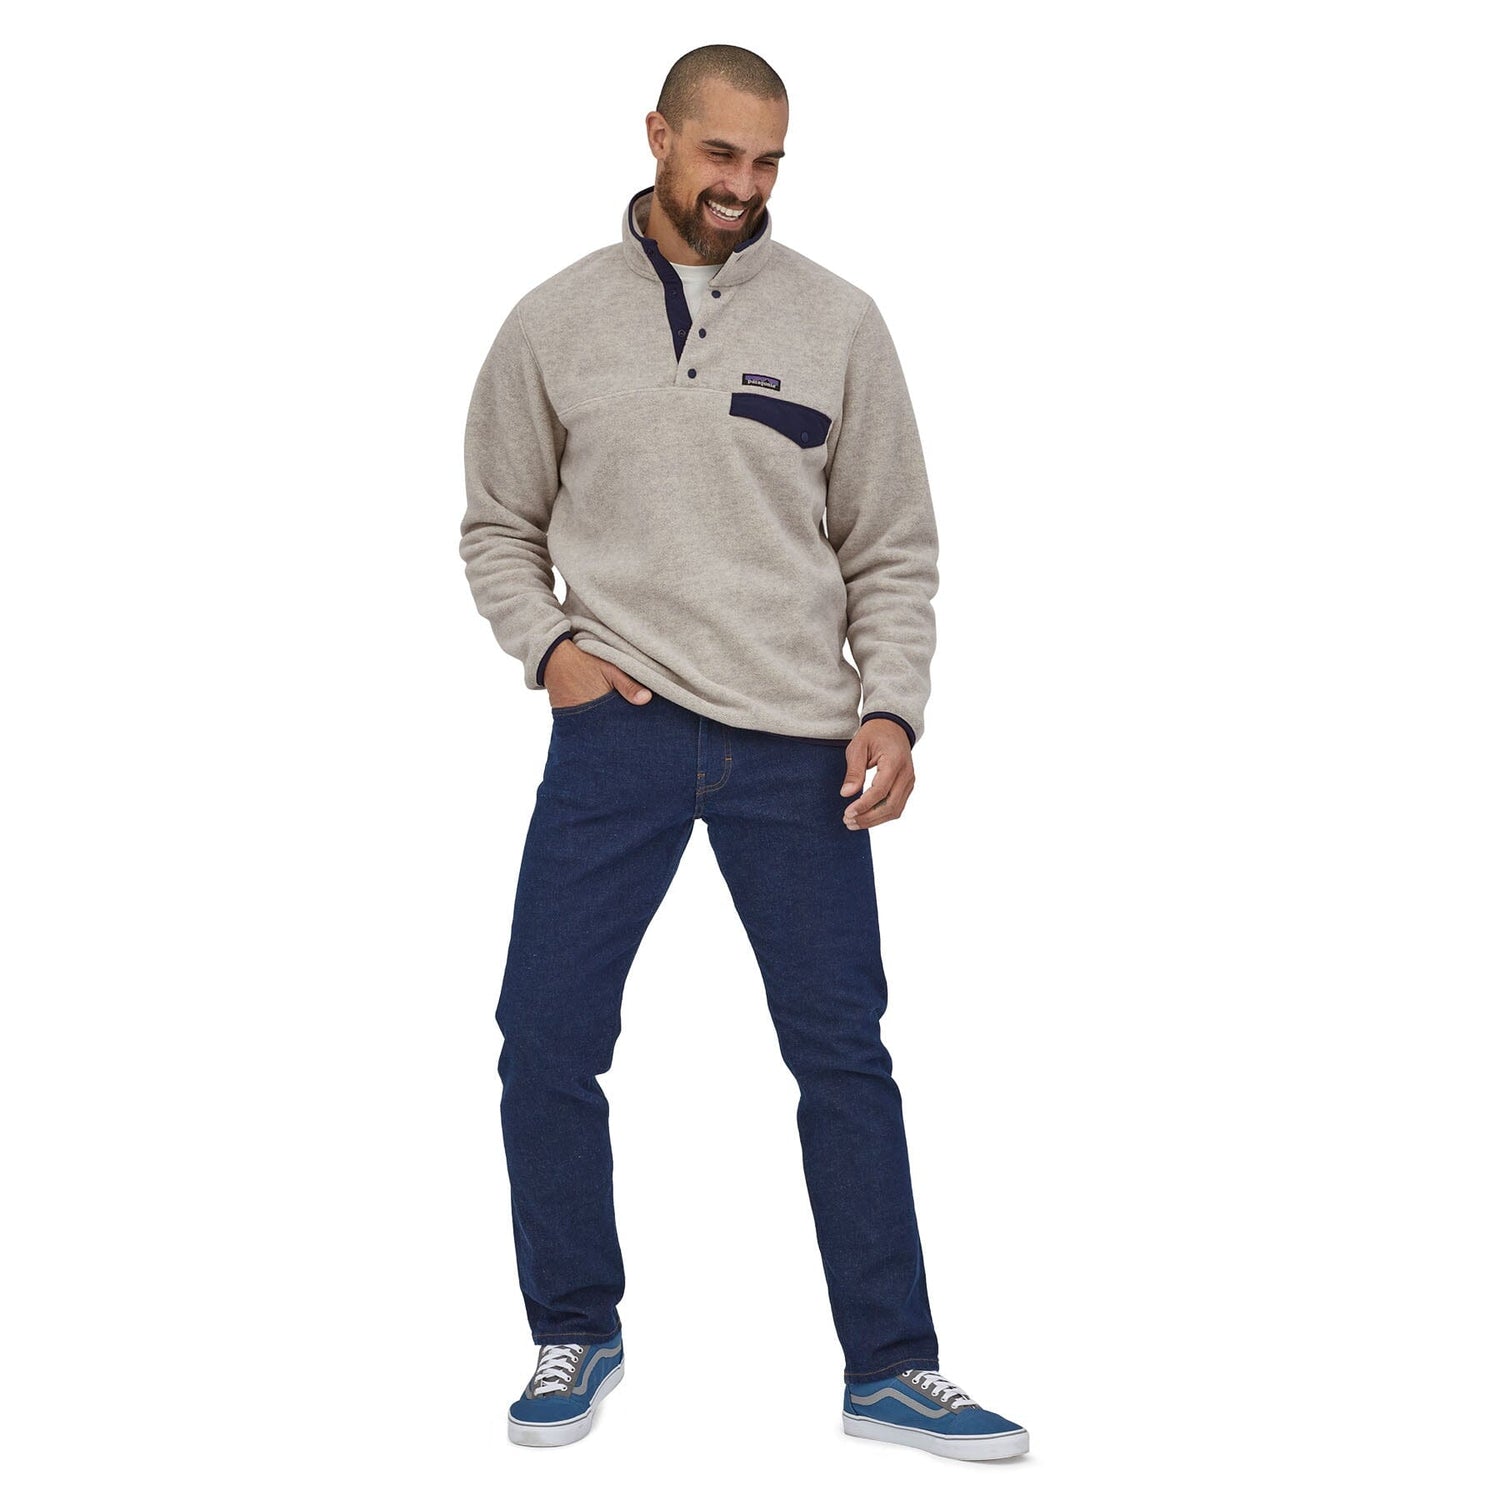 Patagonia - M's LW Synch Snap-T Fleece Pullover - 100% Recycled Polyester - Weekendbee - sustainable sportswear